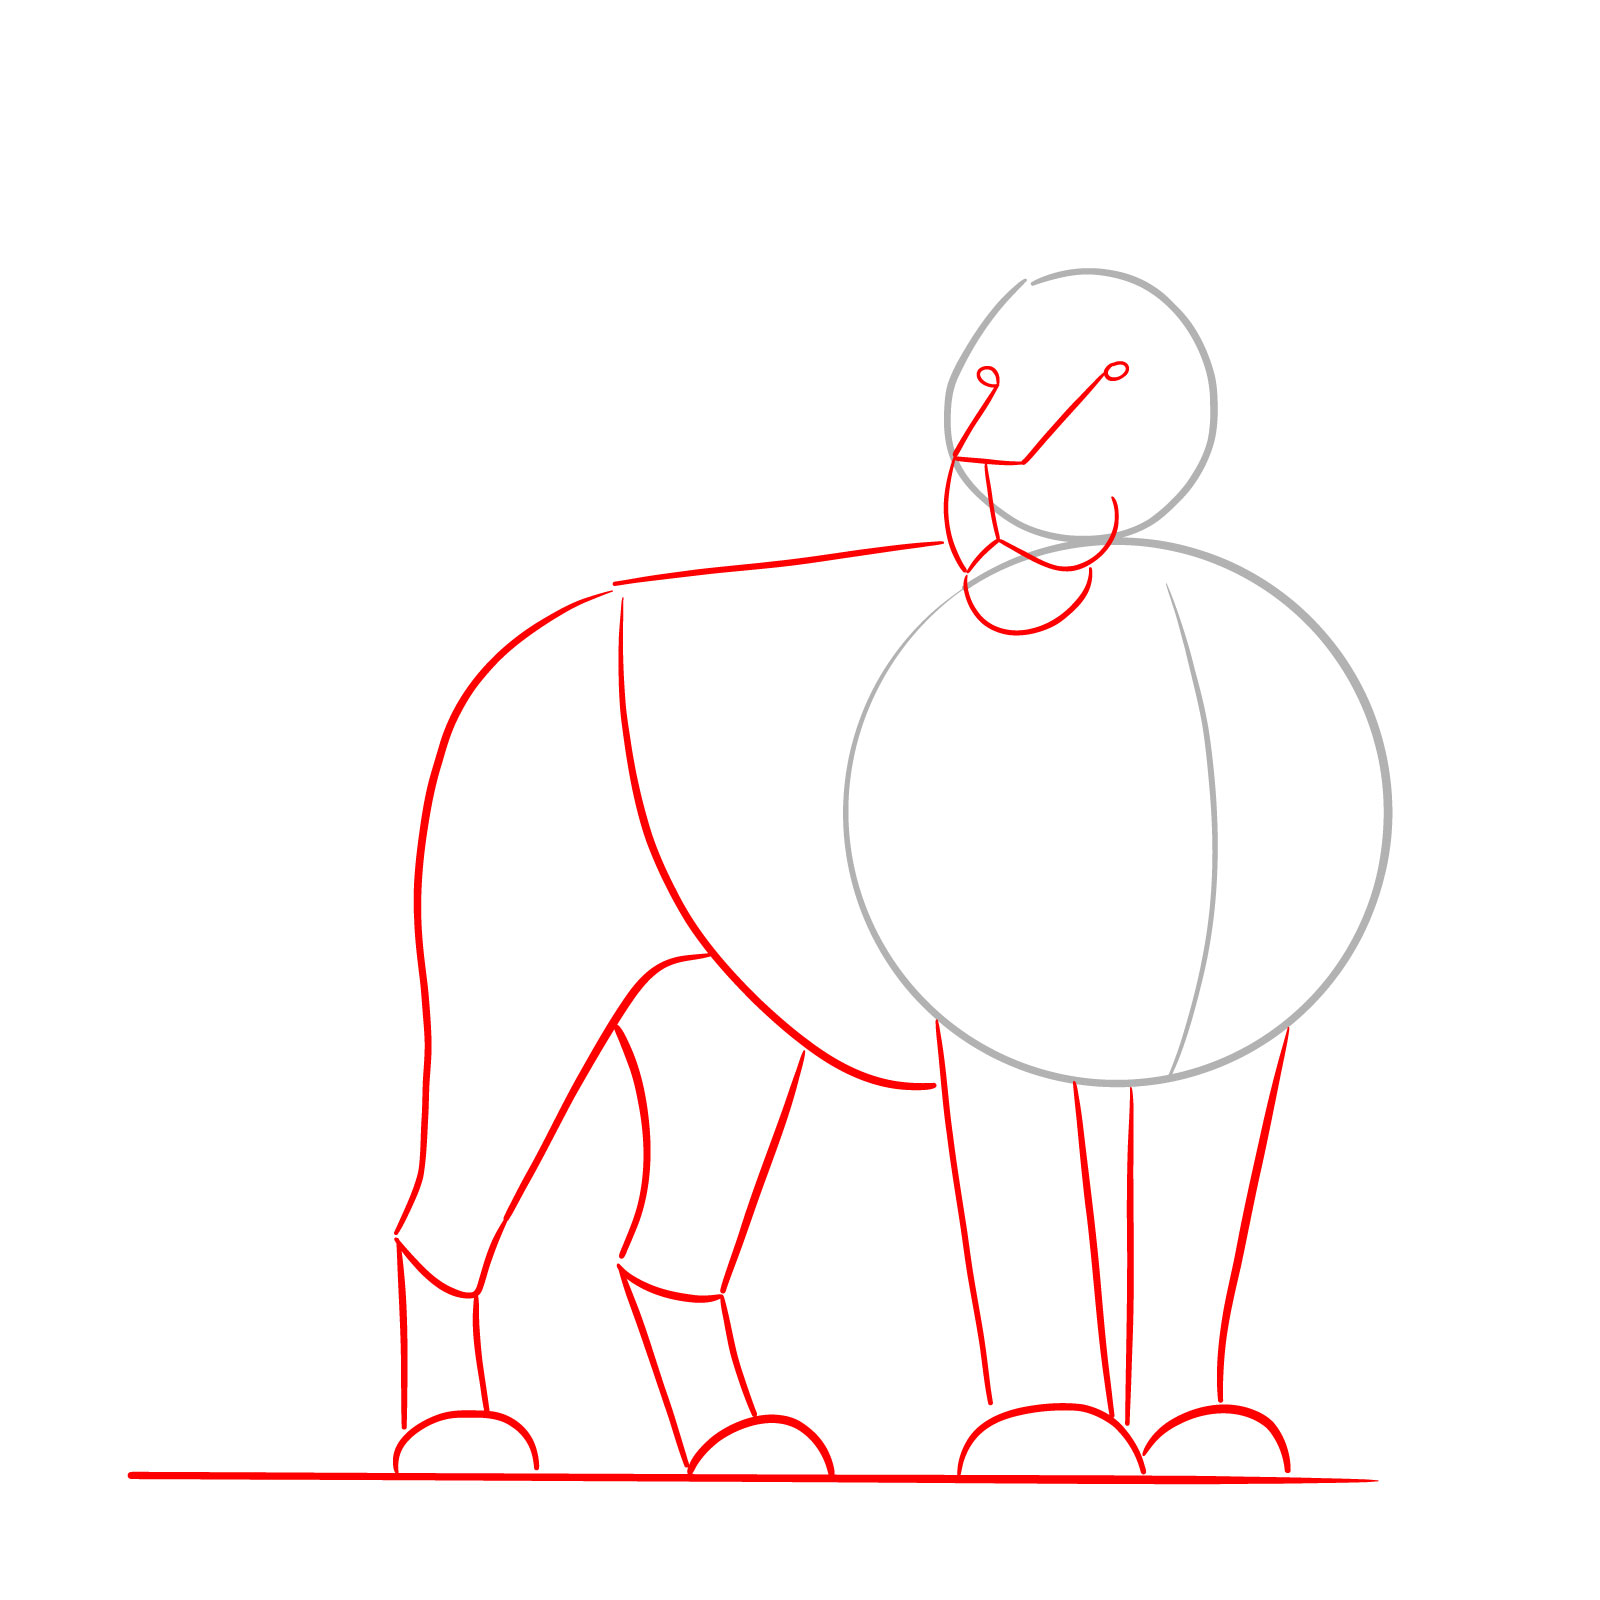 Guide for drawing the lion's body and legs in a standing lion drawing tutorial - step 02